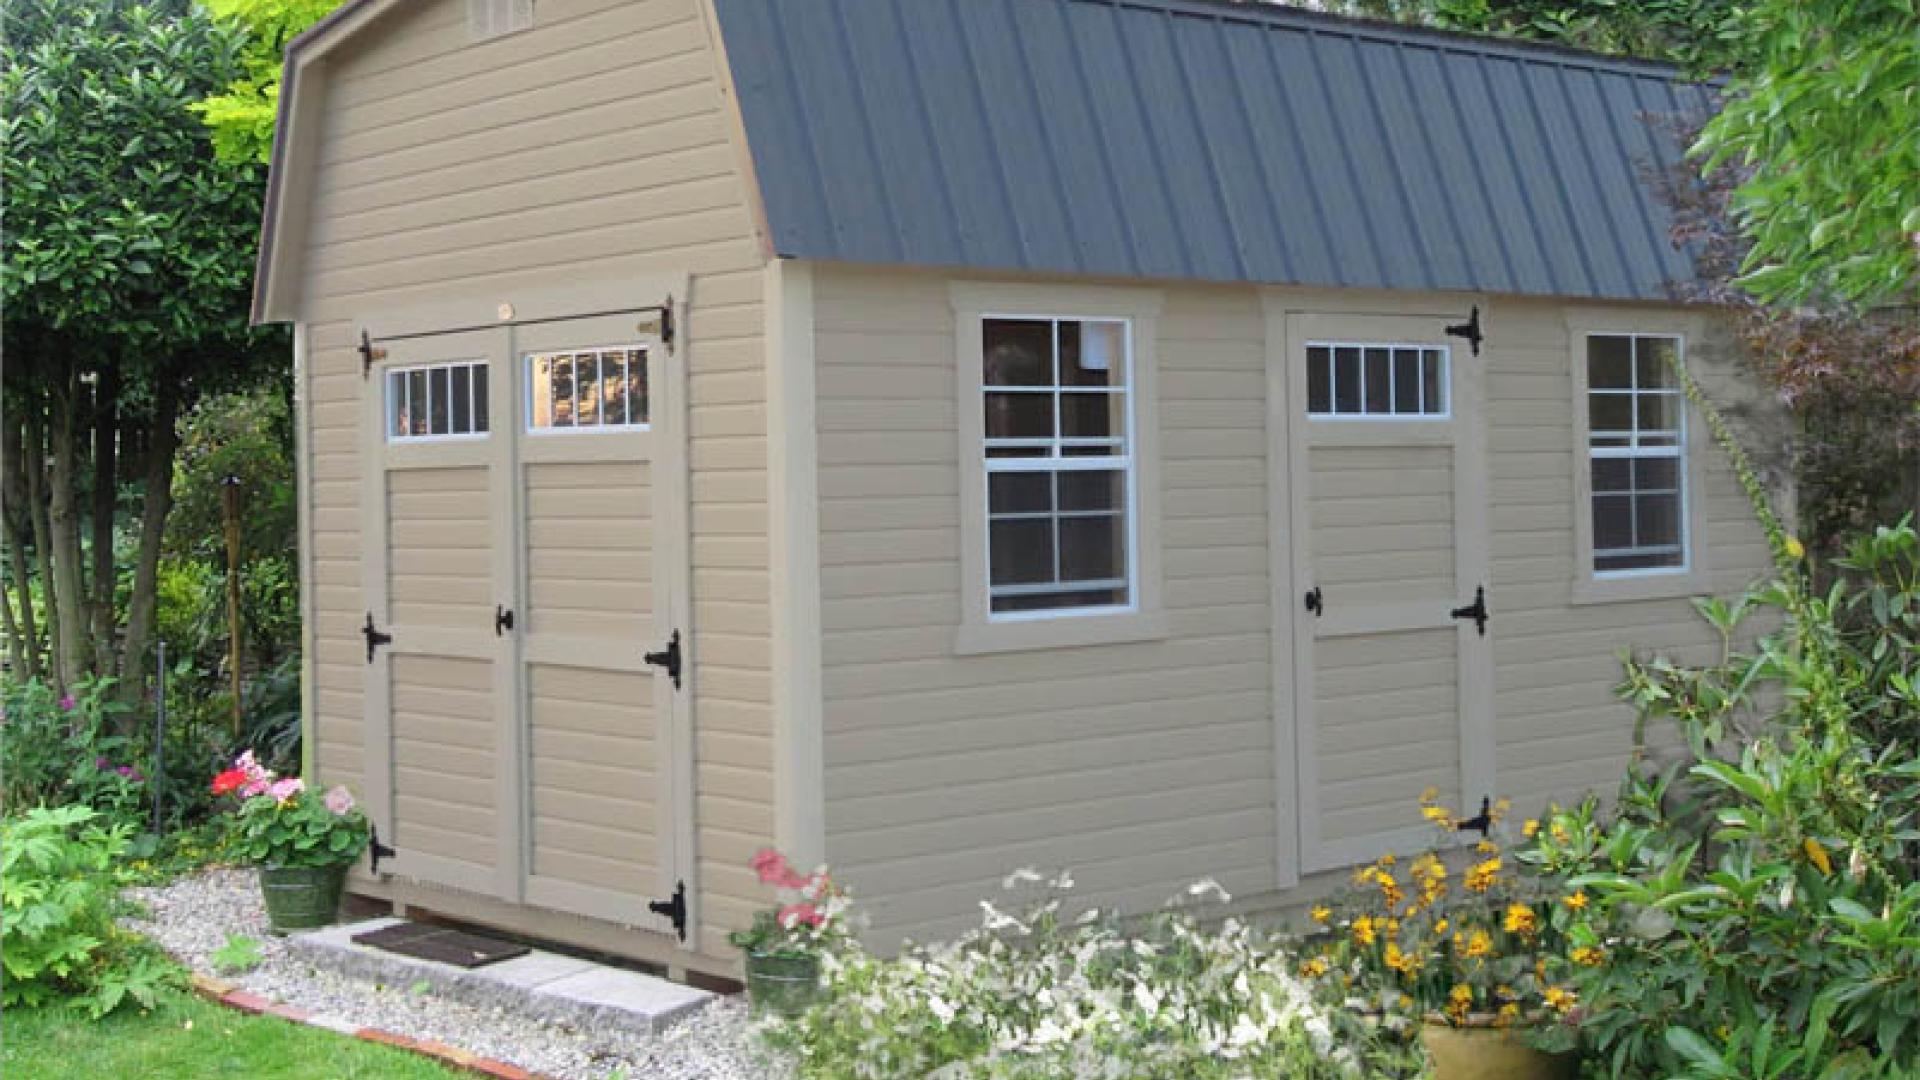 Light tan Signature High Barn with light tan trim, double doors, windows, and a gray roof.